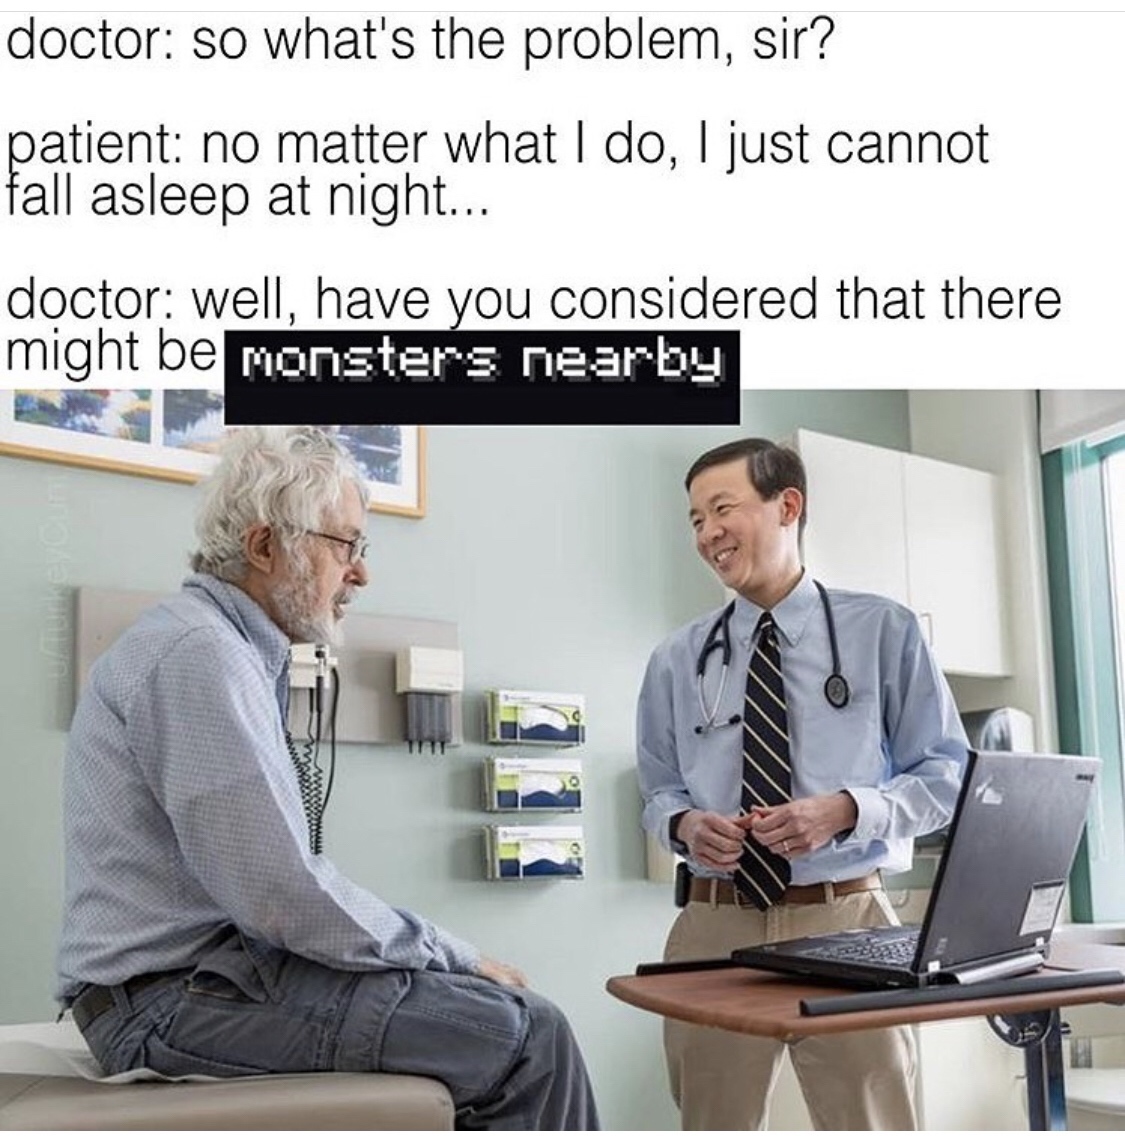 old man minecraft memes - doctor so what's the problem, sir? patient no matter what I do, I just cannot fall asleep at night... doctor well, have you considered that there might be monsters nearby